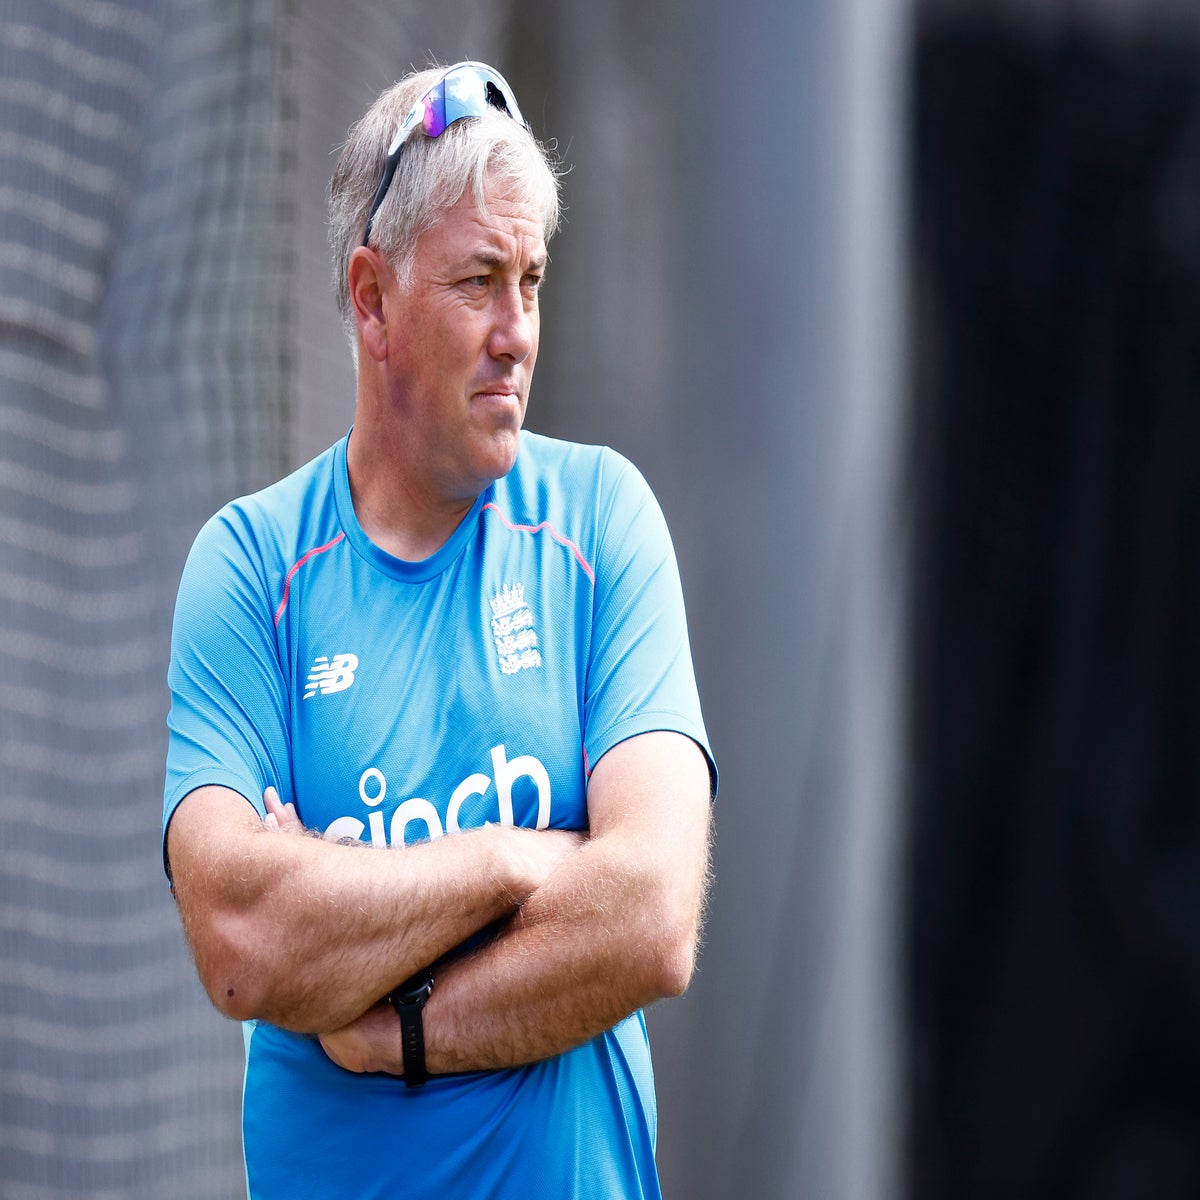 Cricket-England need confidence boost after Ashes mauling: coach Silverwood